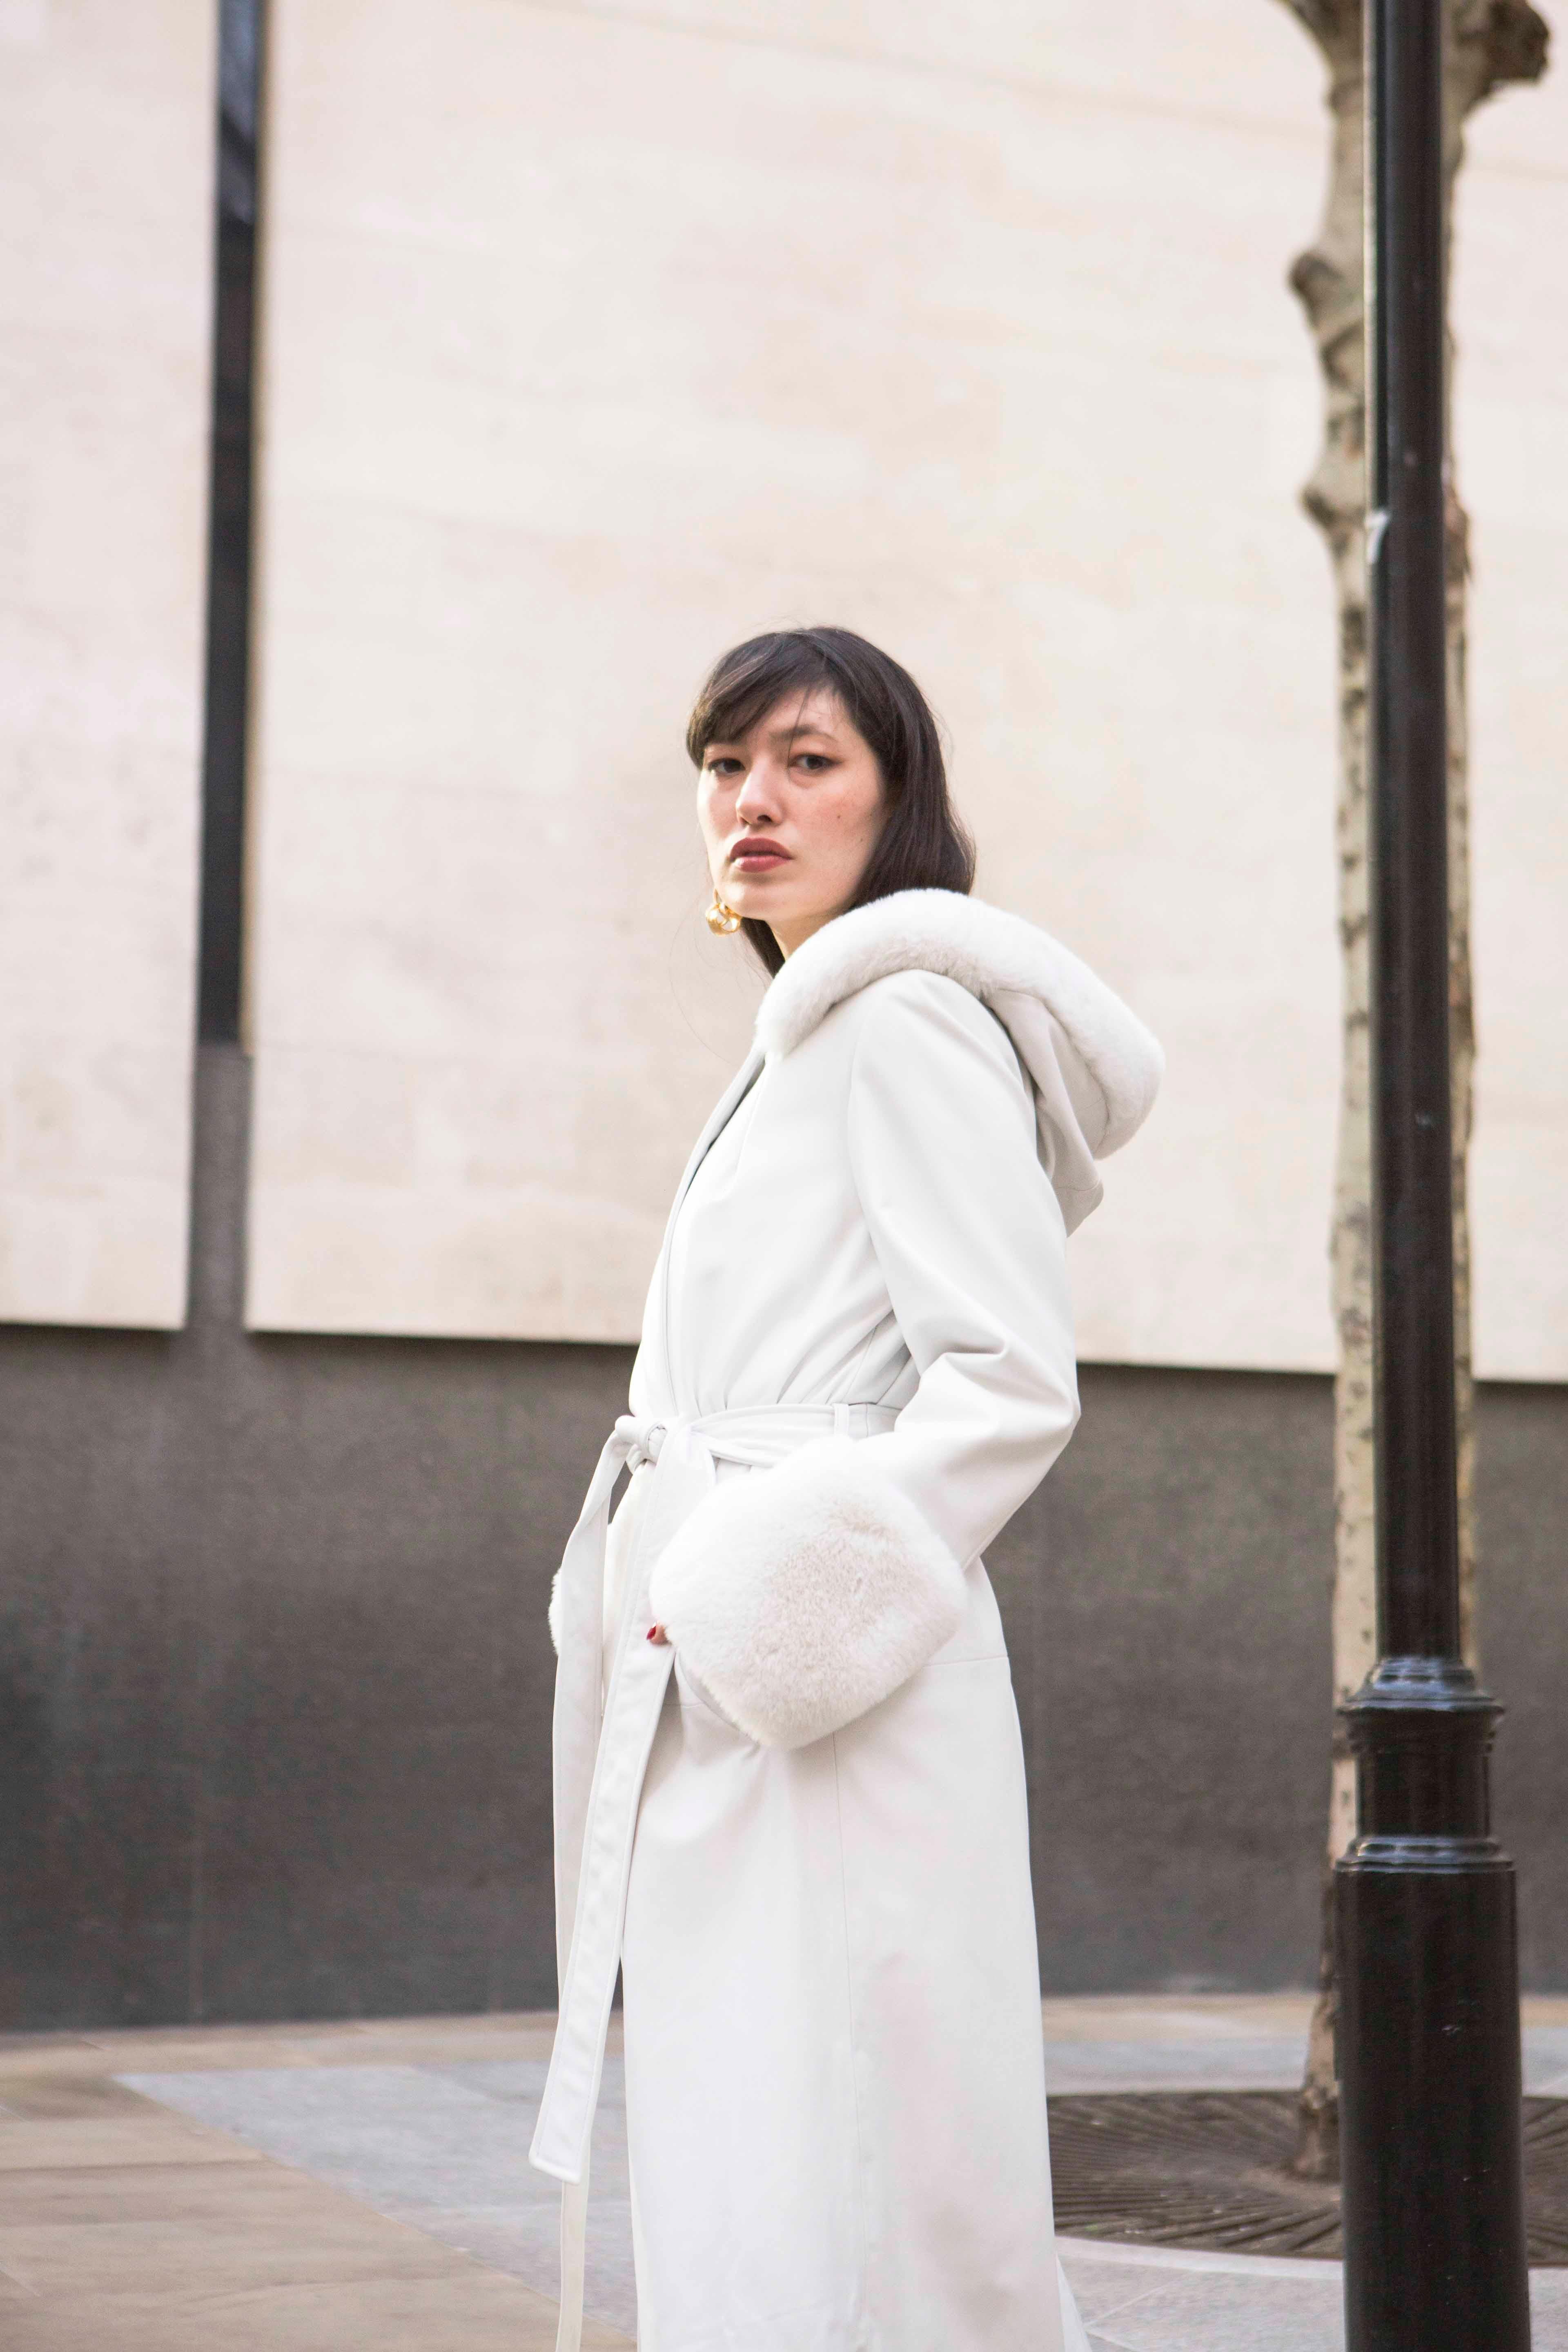 Verheyen London Hooded Leather Trench Coat in White with Faux Fur - Size uk 8

Handmade in London, made with 100% Italian Lambs Leather and the highest quality of faux fur to match, this luxury item is an investment piece to wear for a lifetime. 